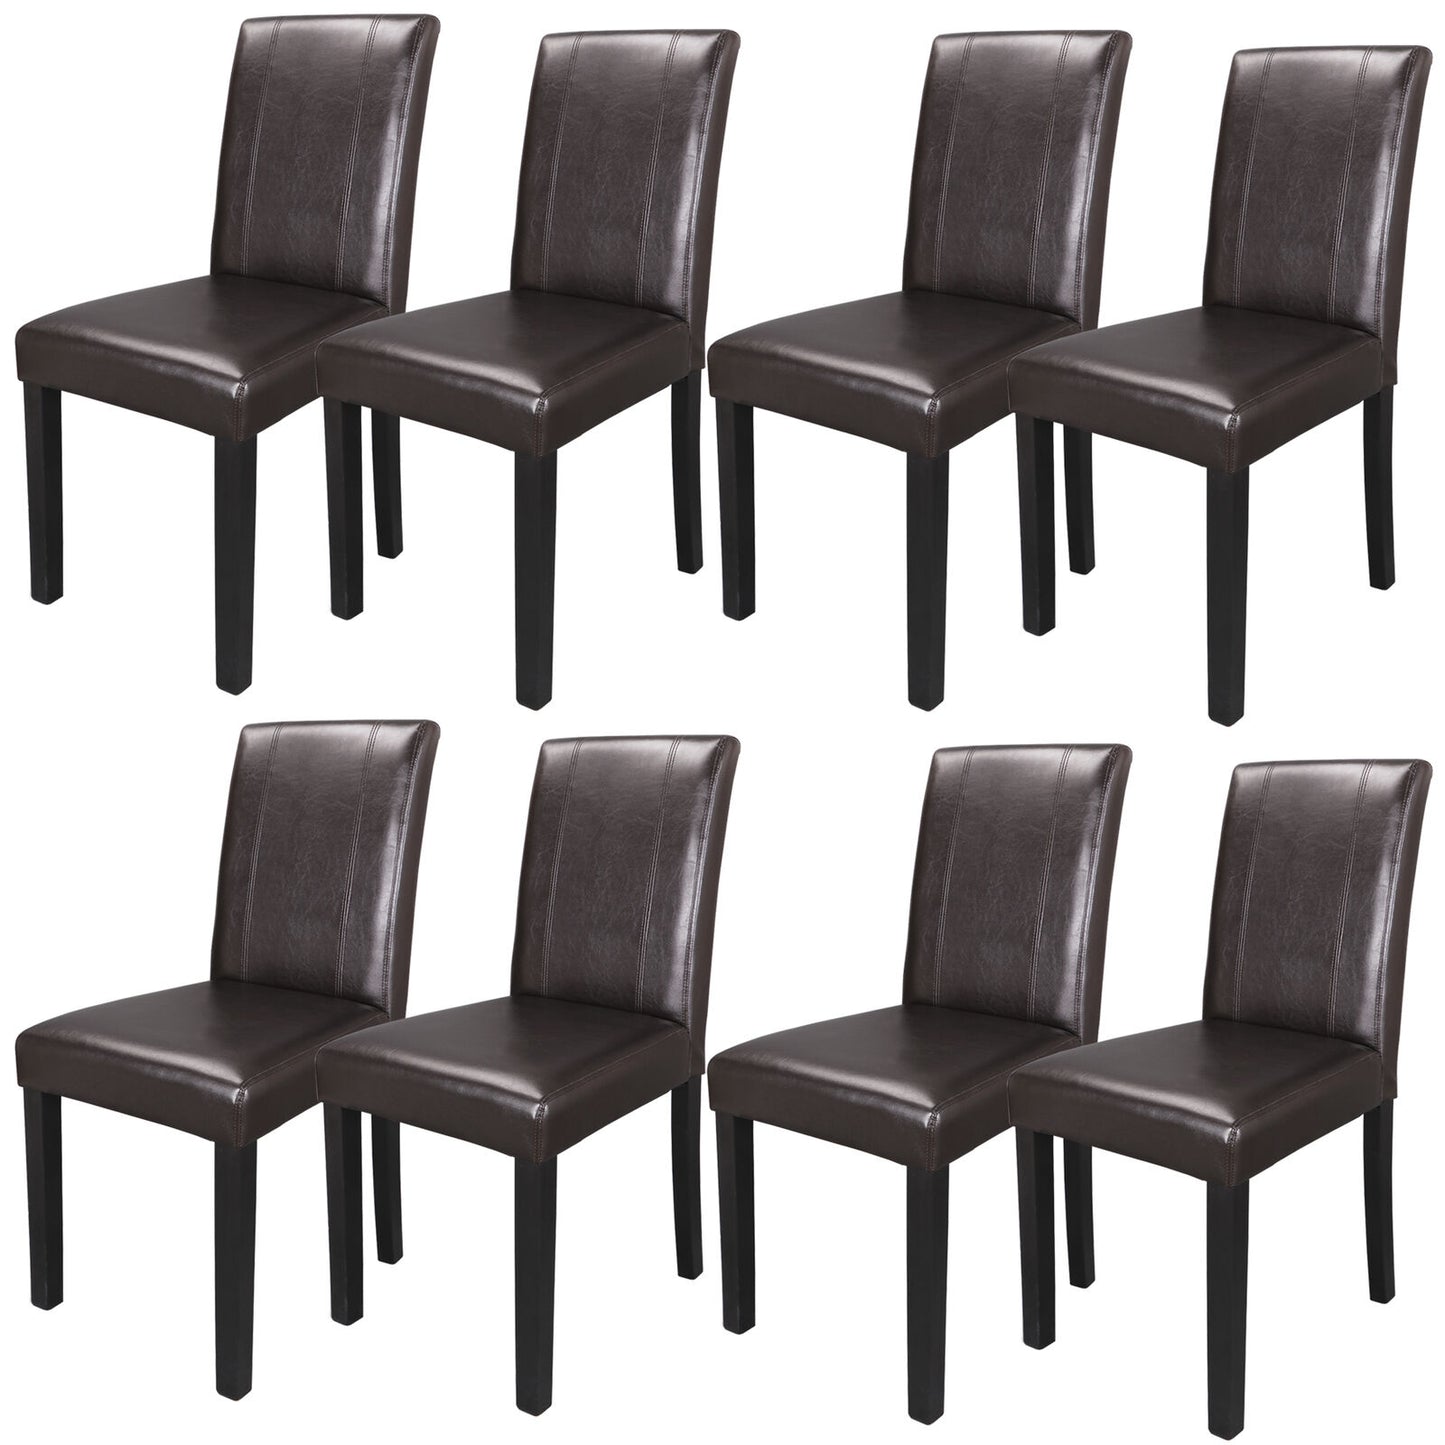 8 Dining Room Chairs Formal Parson Chairs With Leather Accent LEG Solid Wood